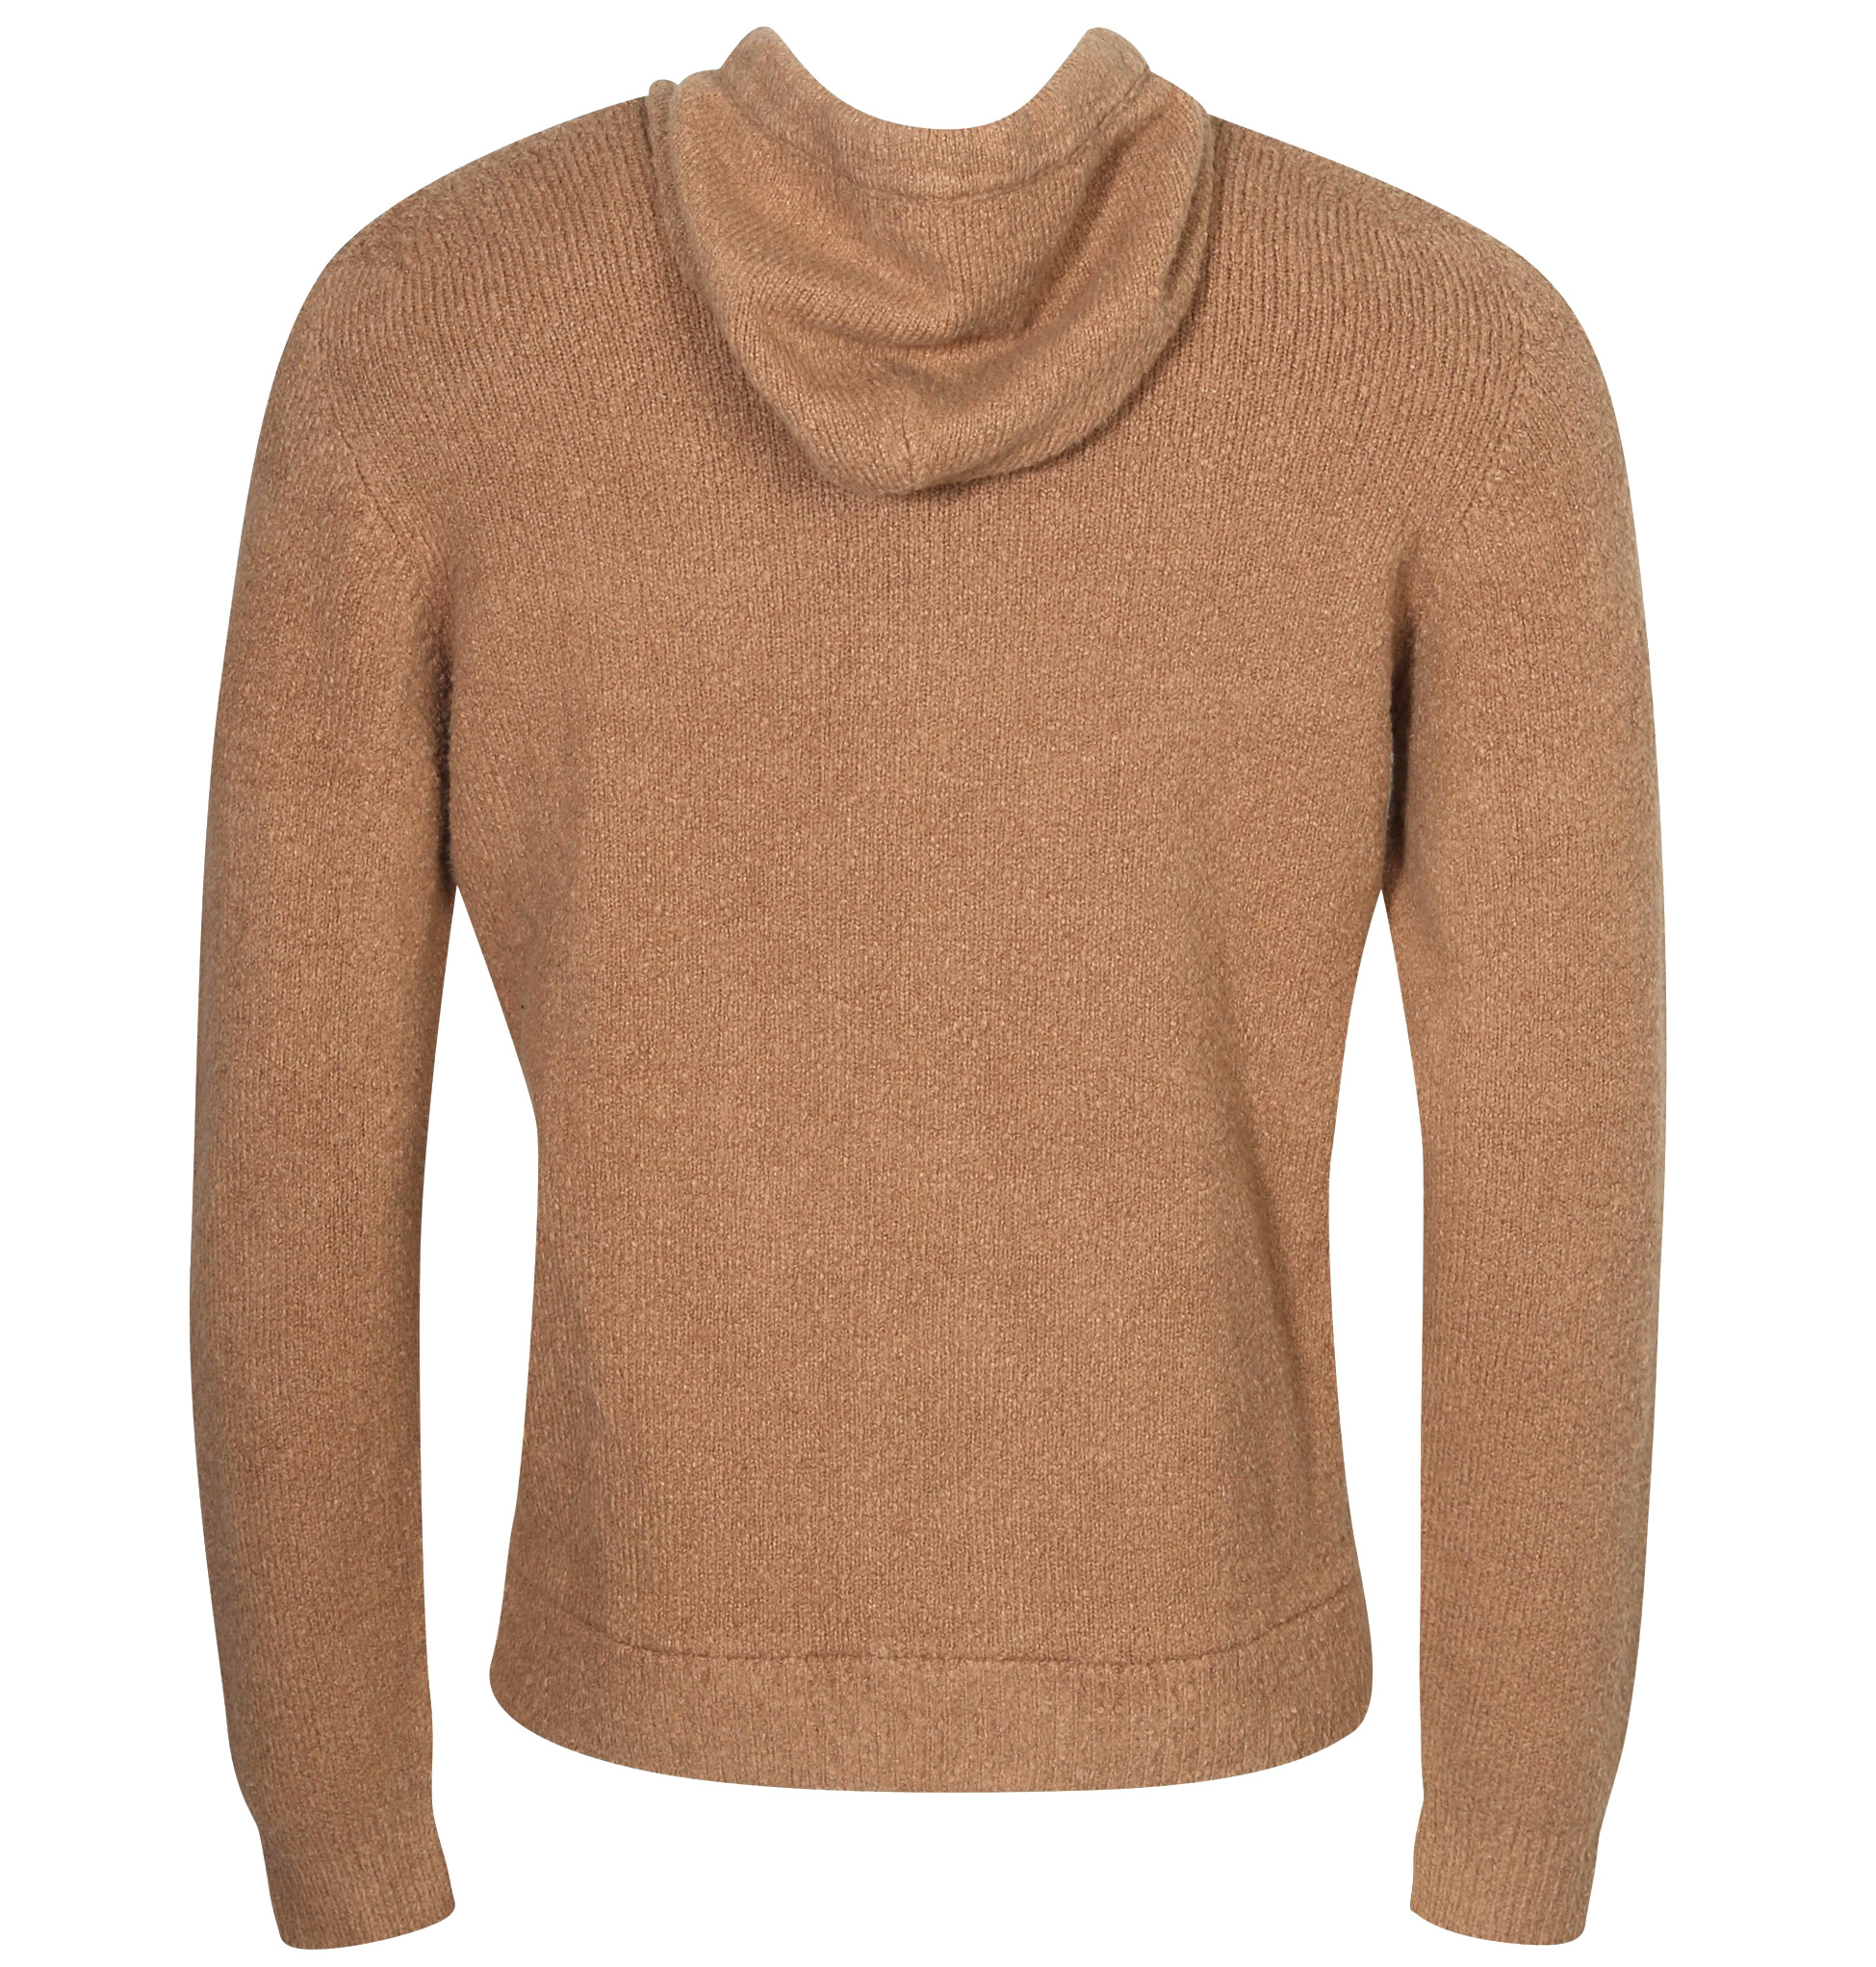 ROBERTO COLLINA Fluffy Cotton Knit Zip Hoodie in Washed Camel 56